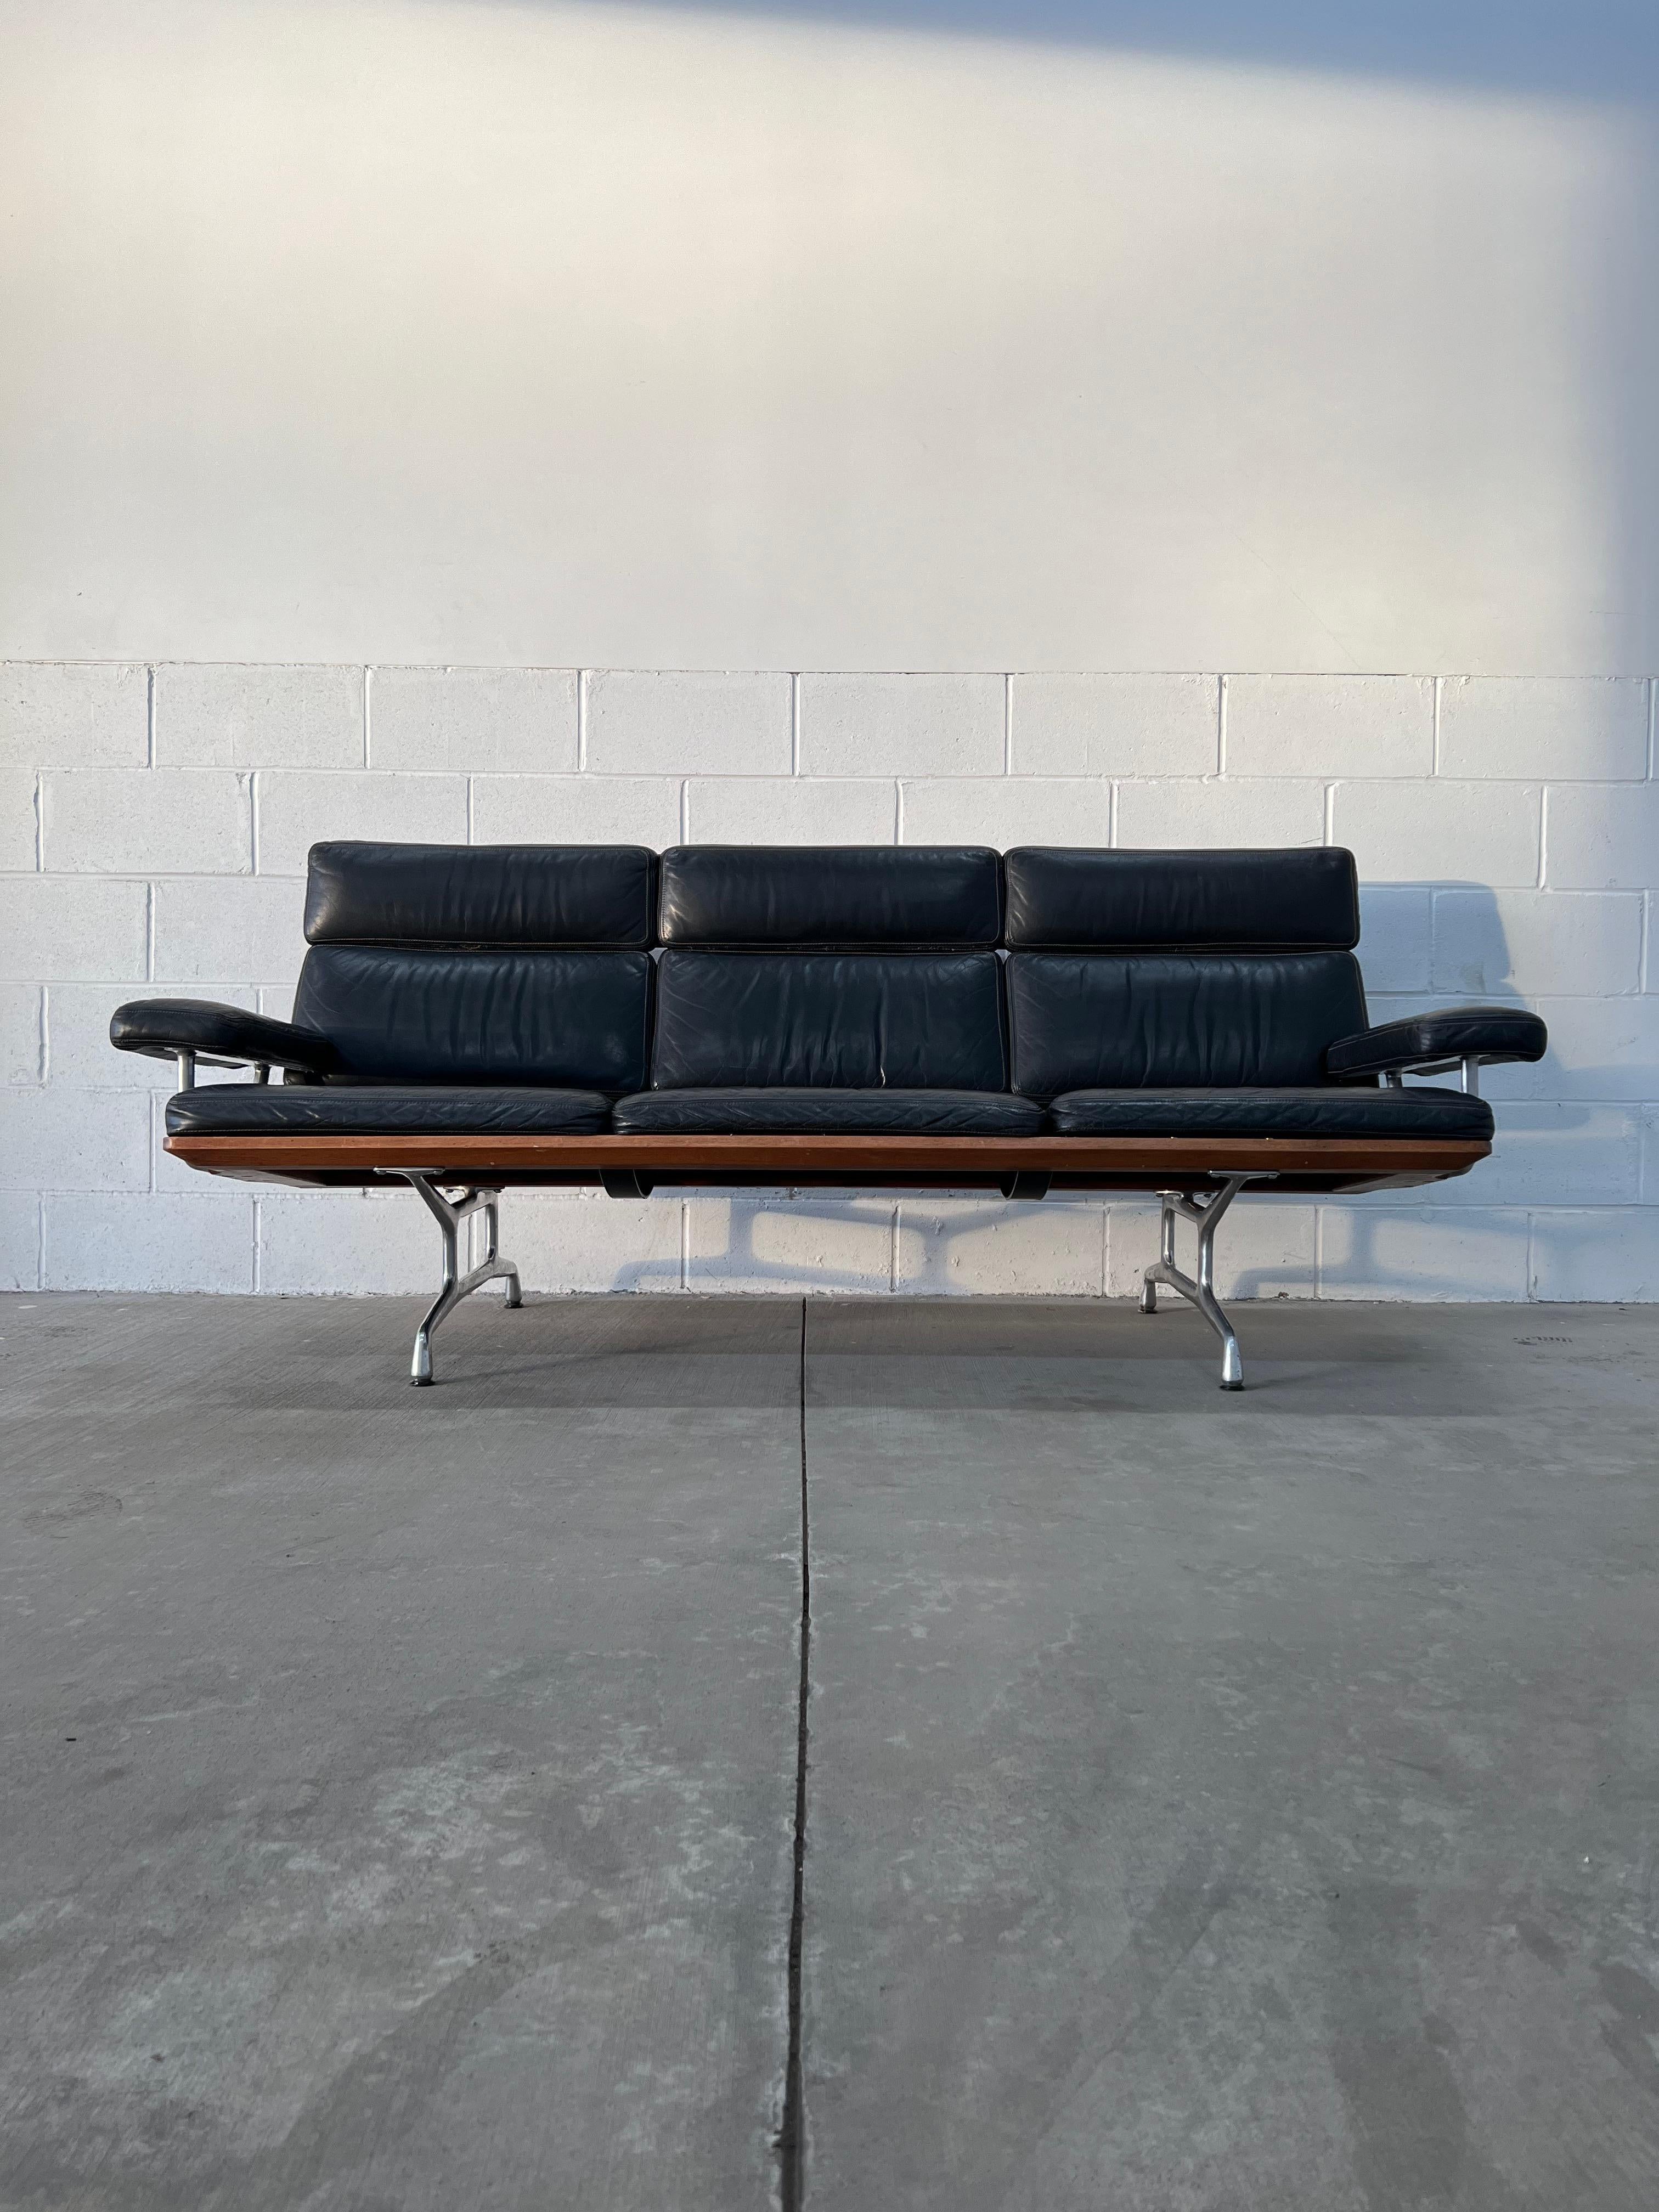 The ES108 is unique in the lore of the Eameses as it was the last design completed by the Eames Office. A hybrid of the Soft Pad Group and the Eames Lounge Chair and Ottoman, the ES108 married the comfortable office chair with the comfort of the